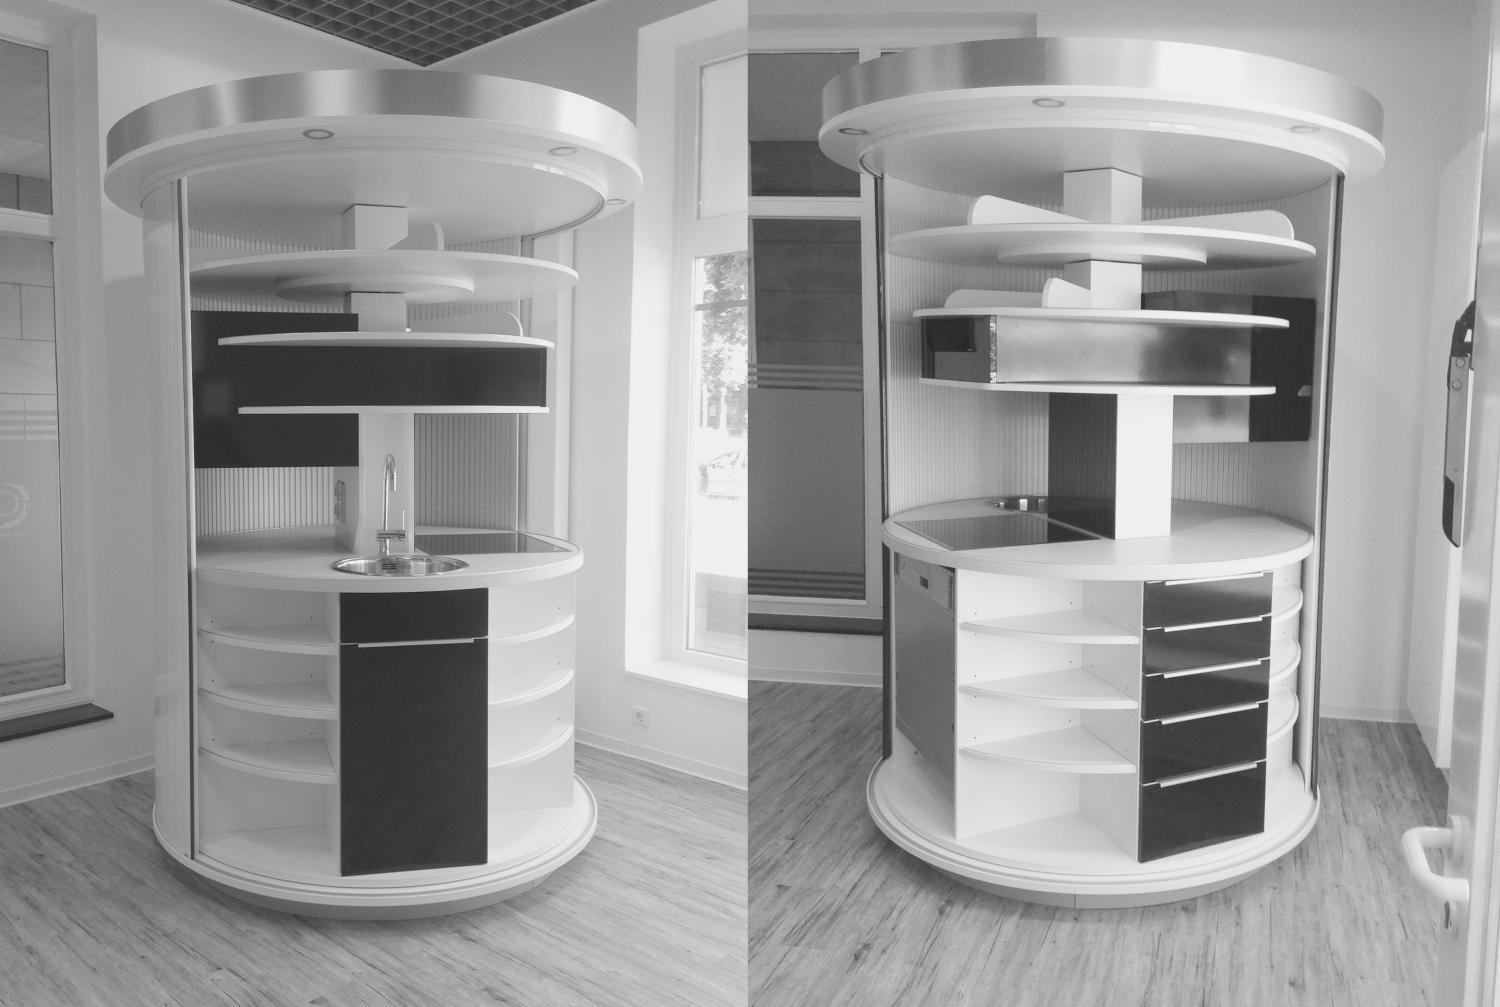 Incredible Rotating Circle Kitchen Is A Perfect Space Saver For Tiny Homes 5588 